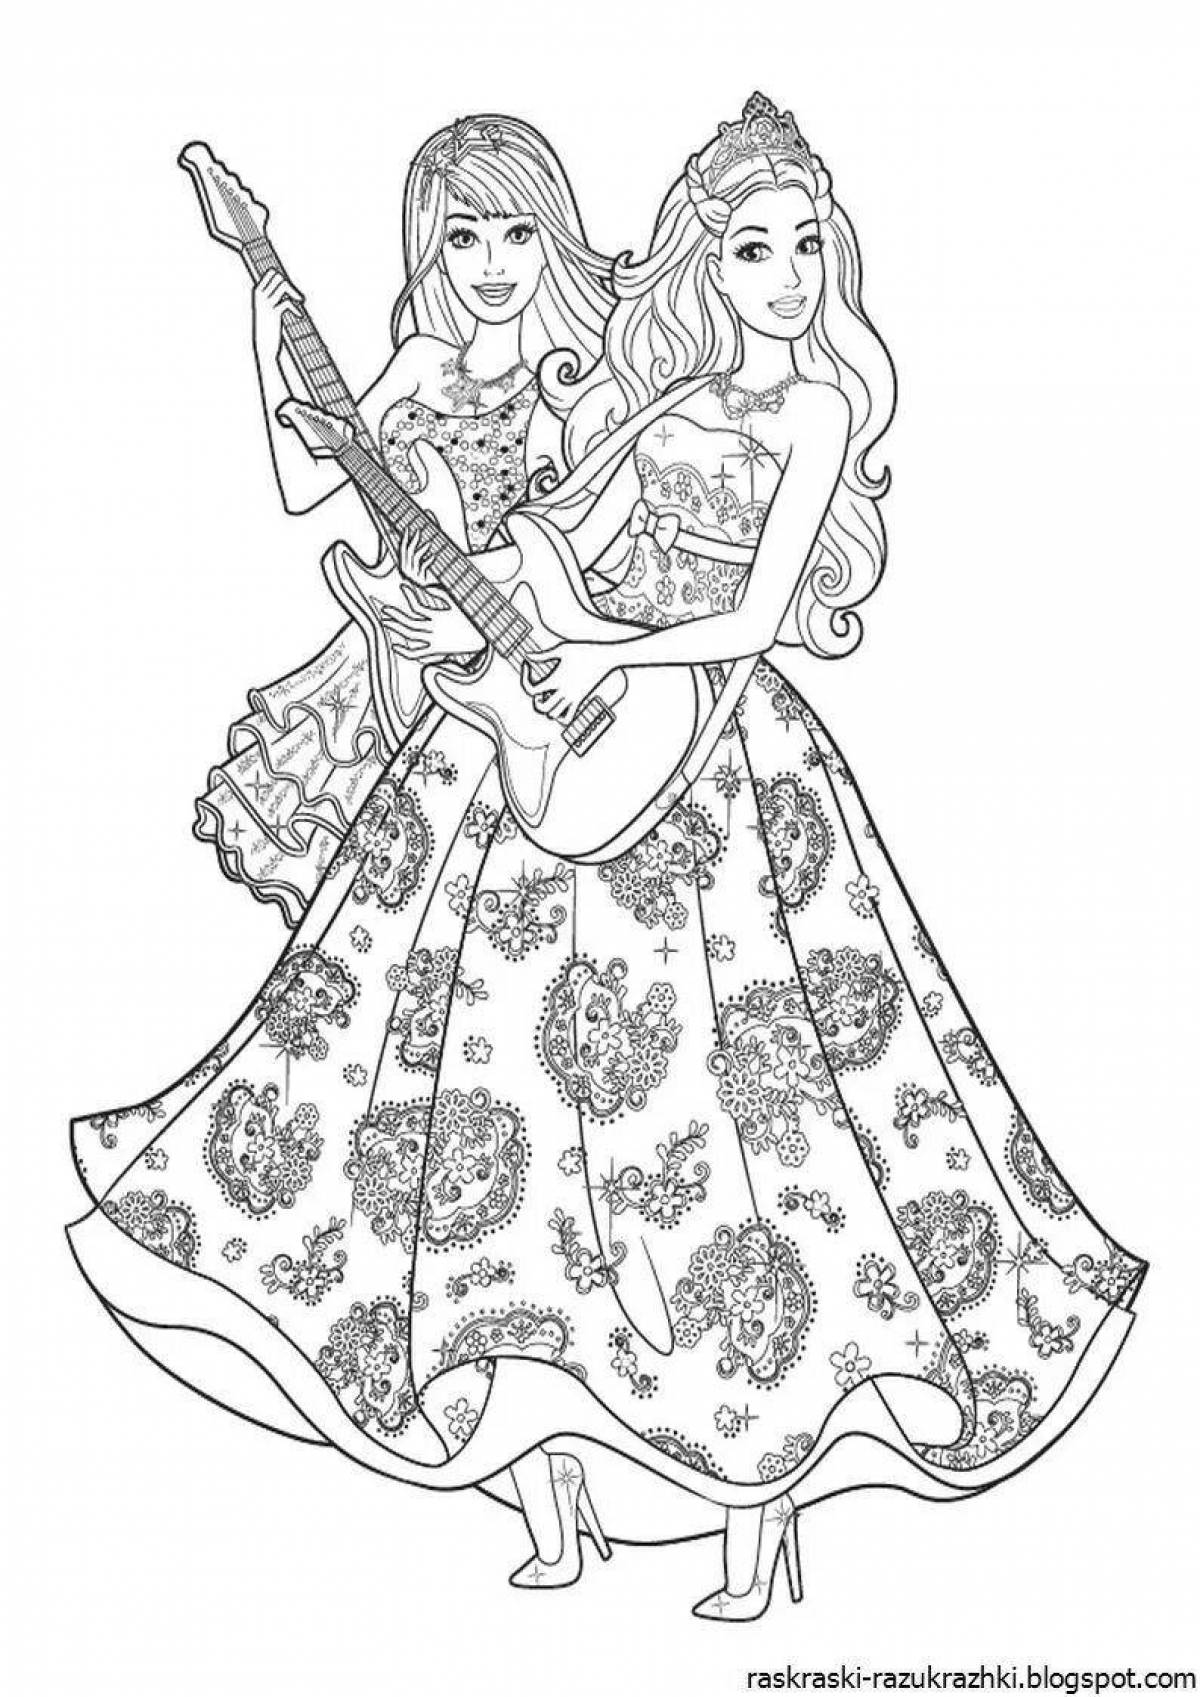 Adorable barbie princess coloring book for girls